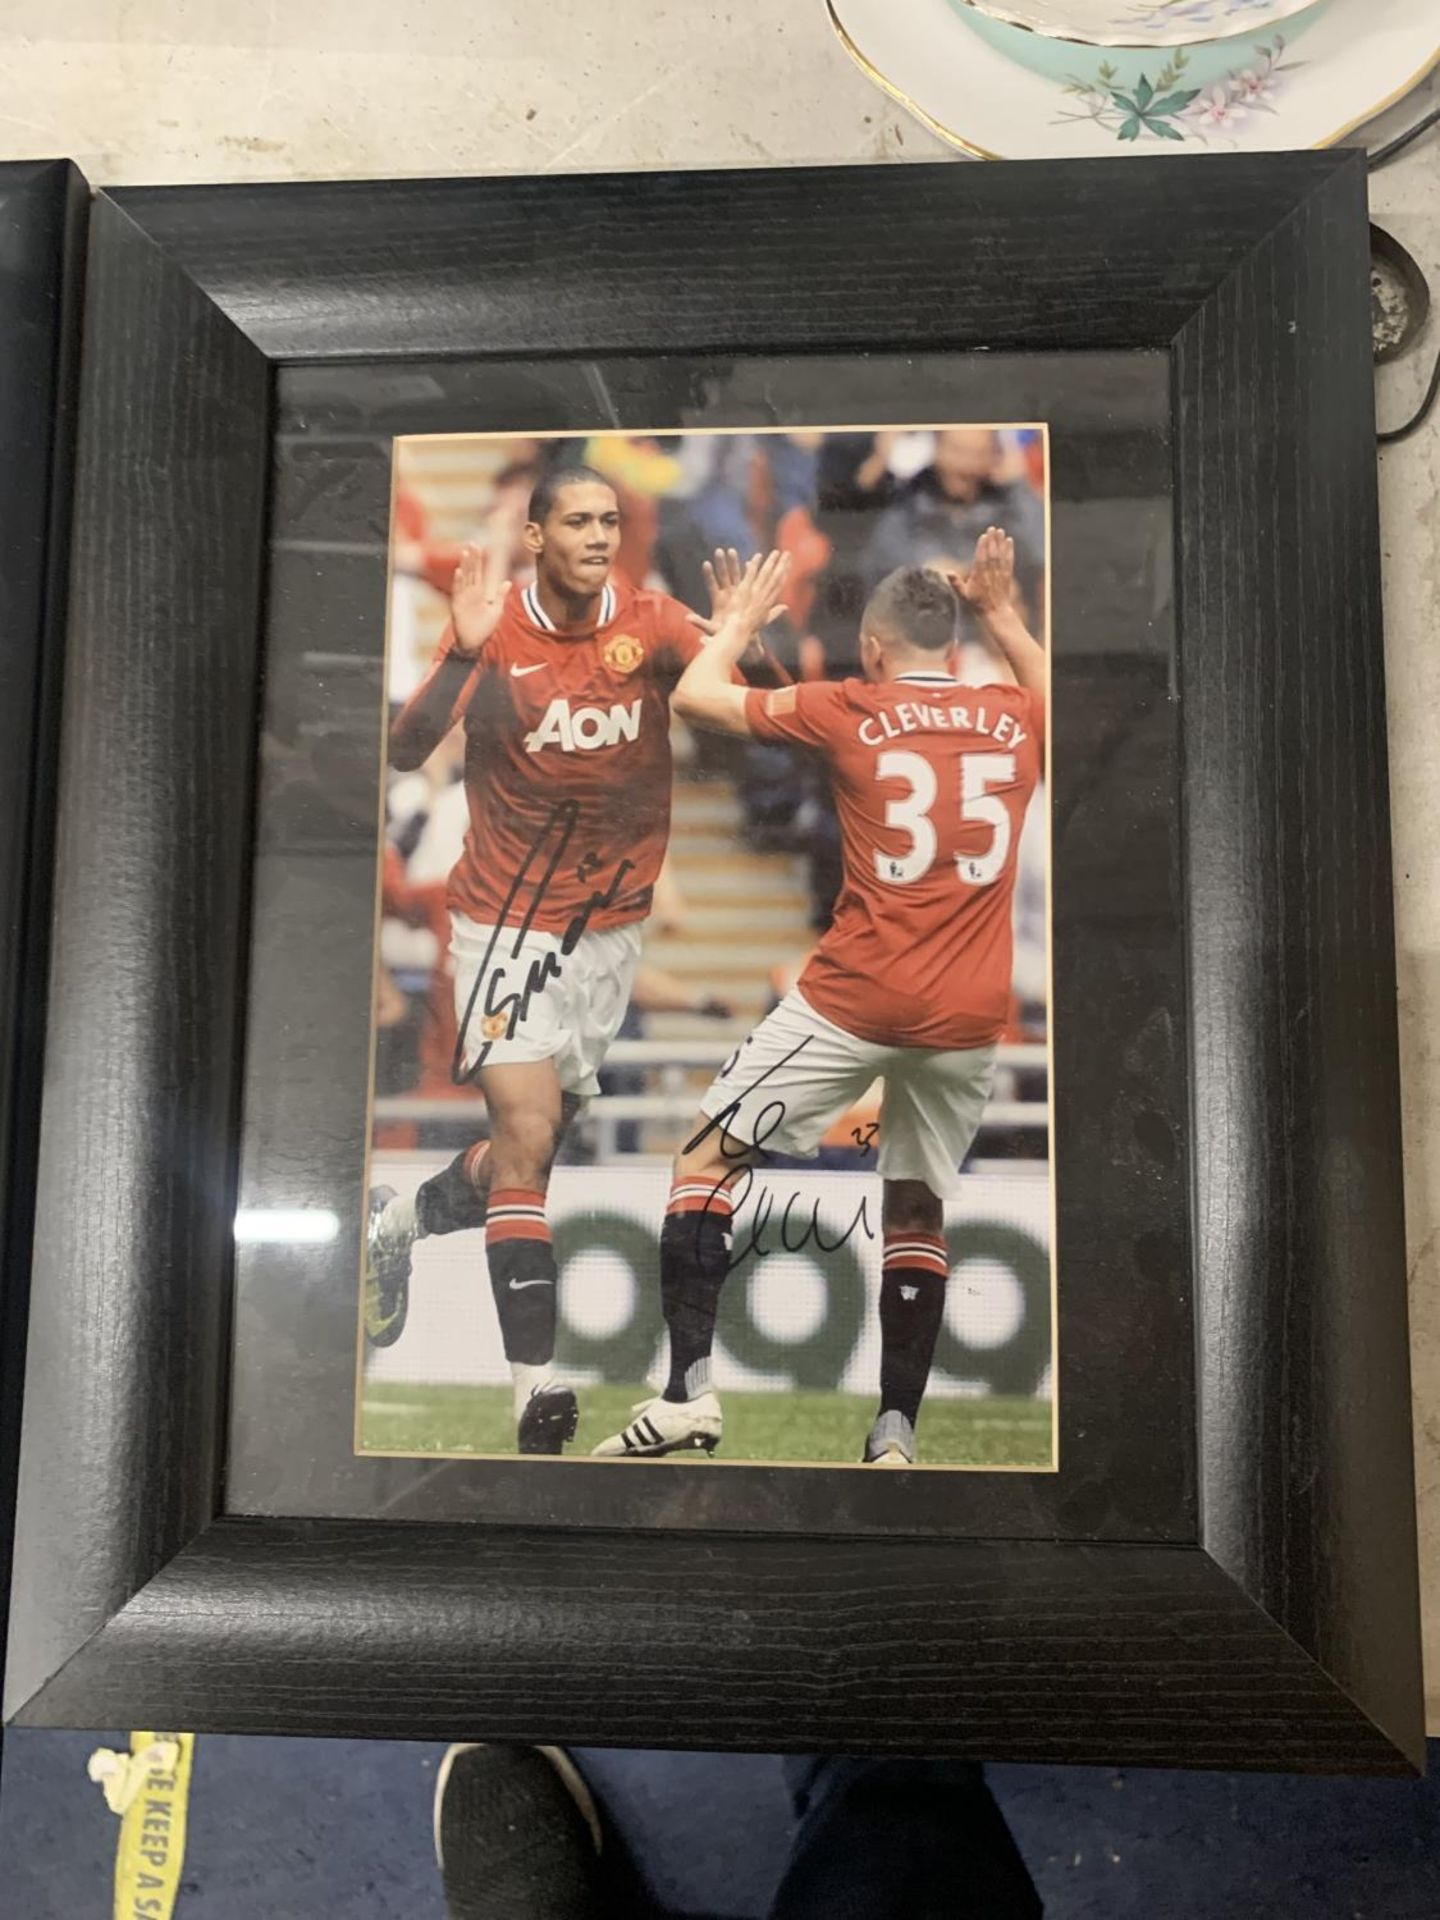 A FRAMED SIGNED PHOTO OF CHRIS SMALLING AND CLEVERLEY